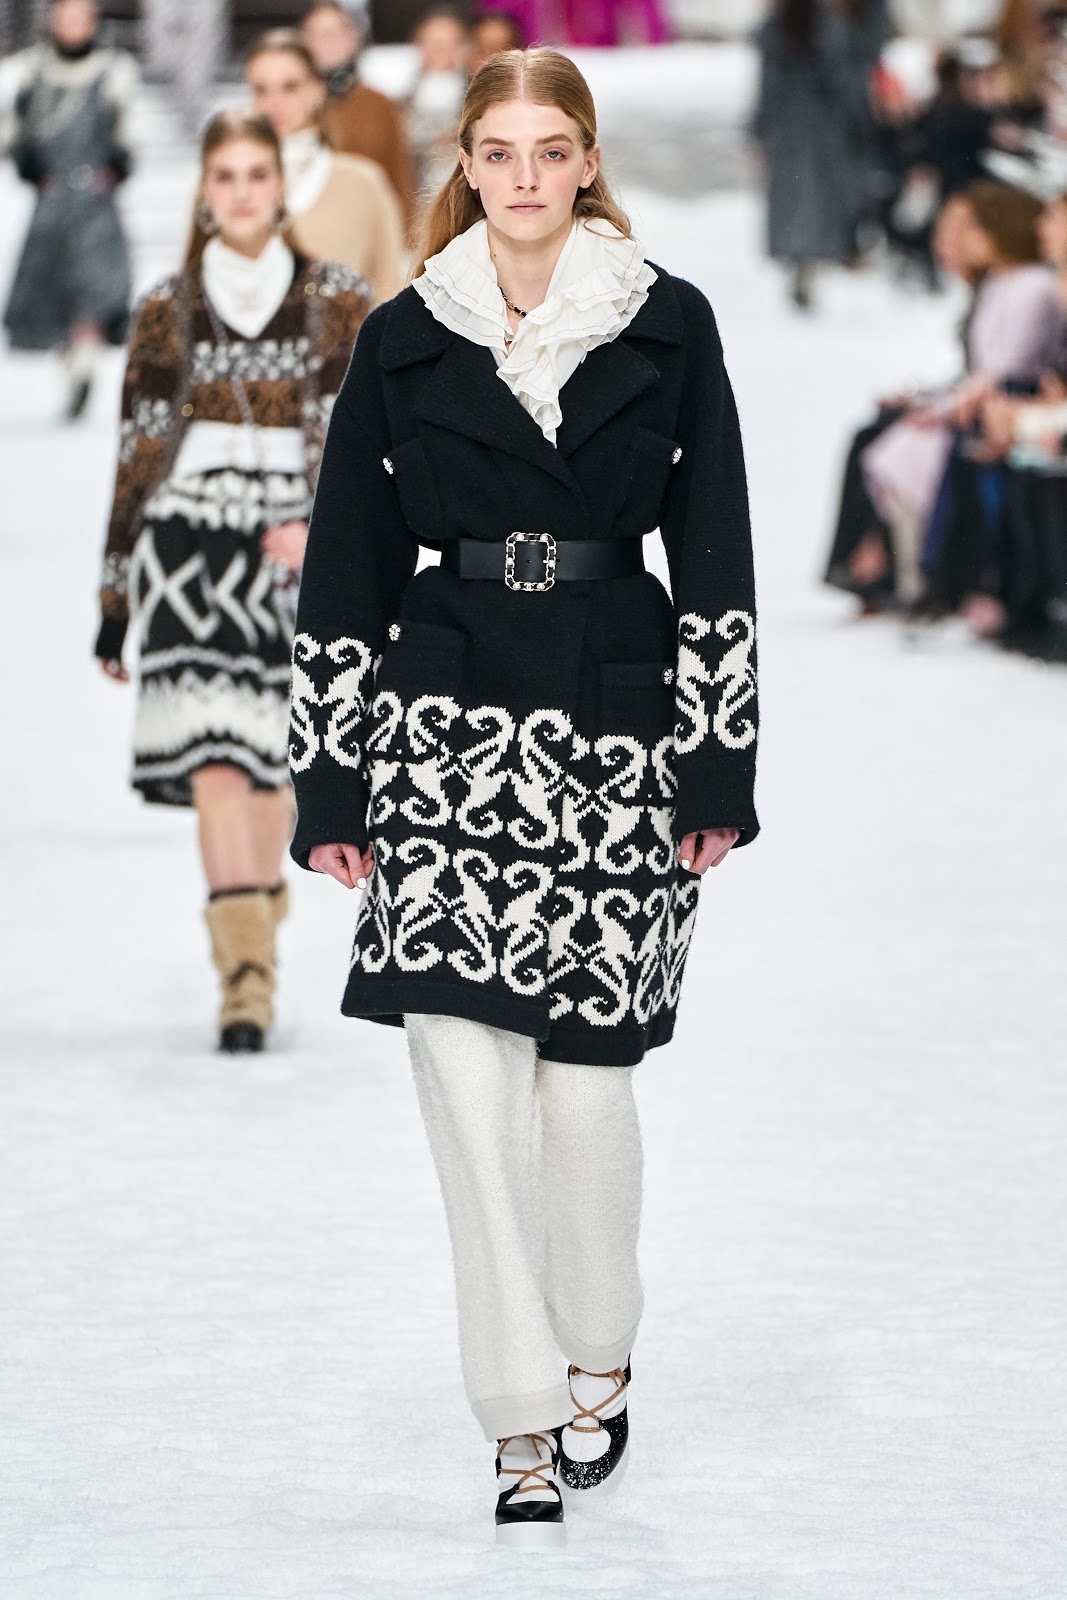 The Best Looks From Chanel Fall/Winter 2019 Runway – StyleCaster